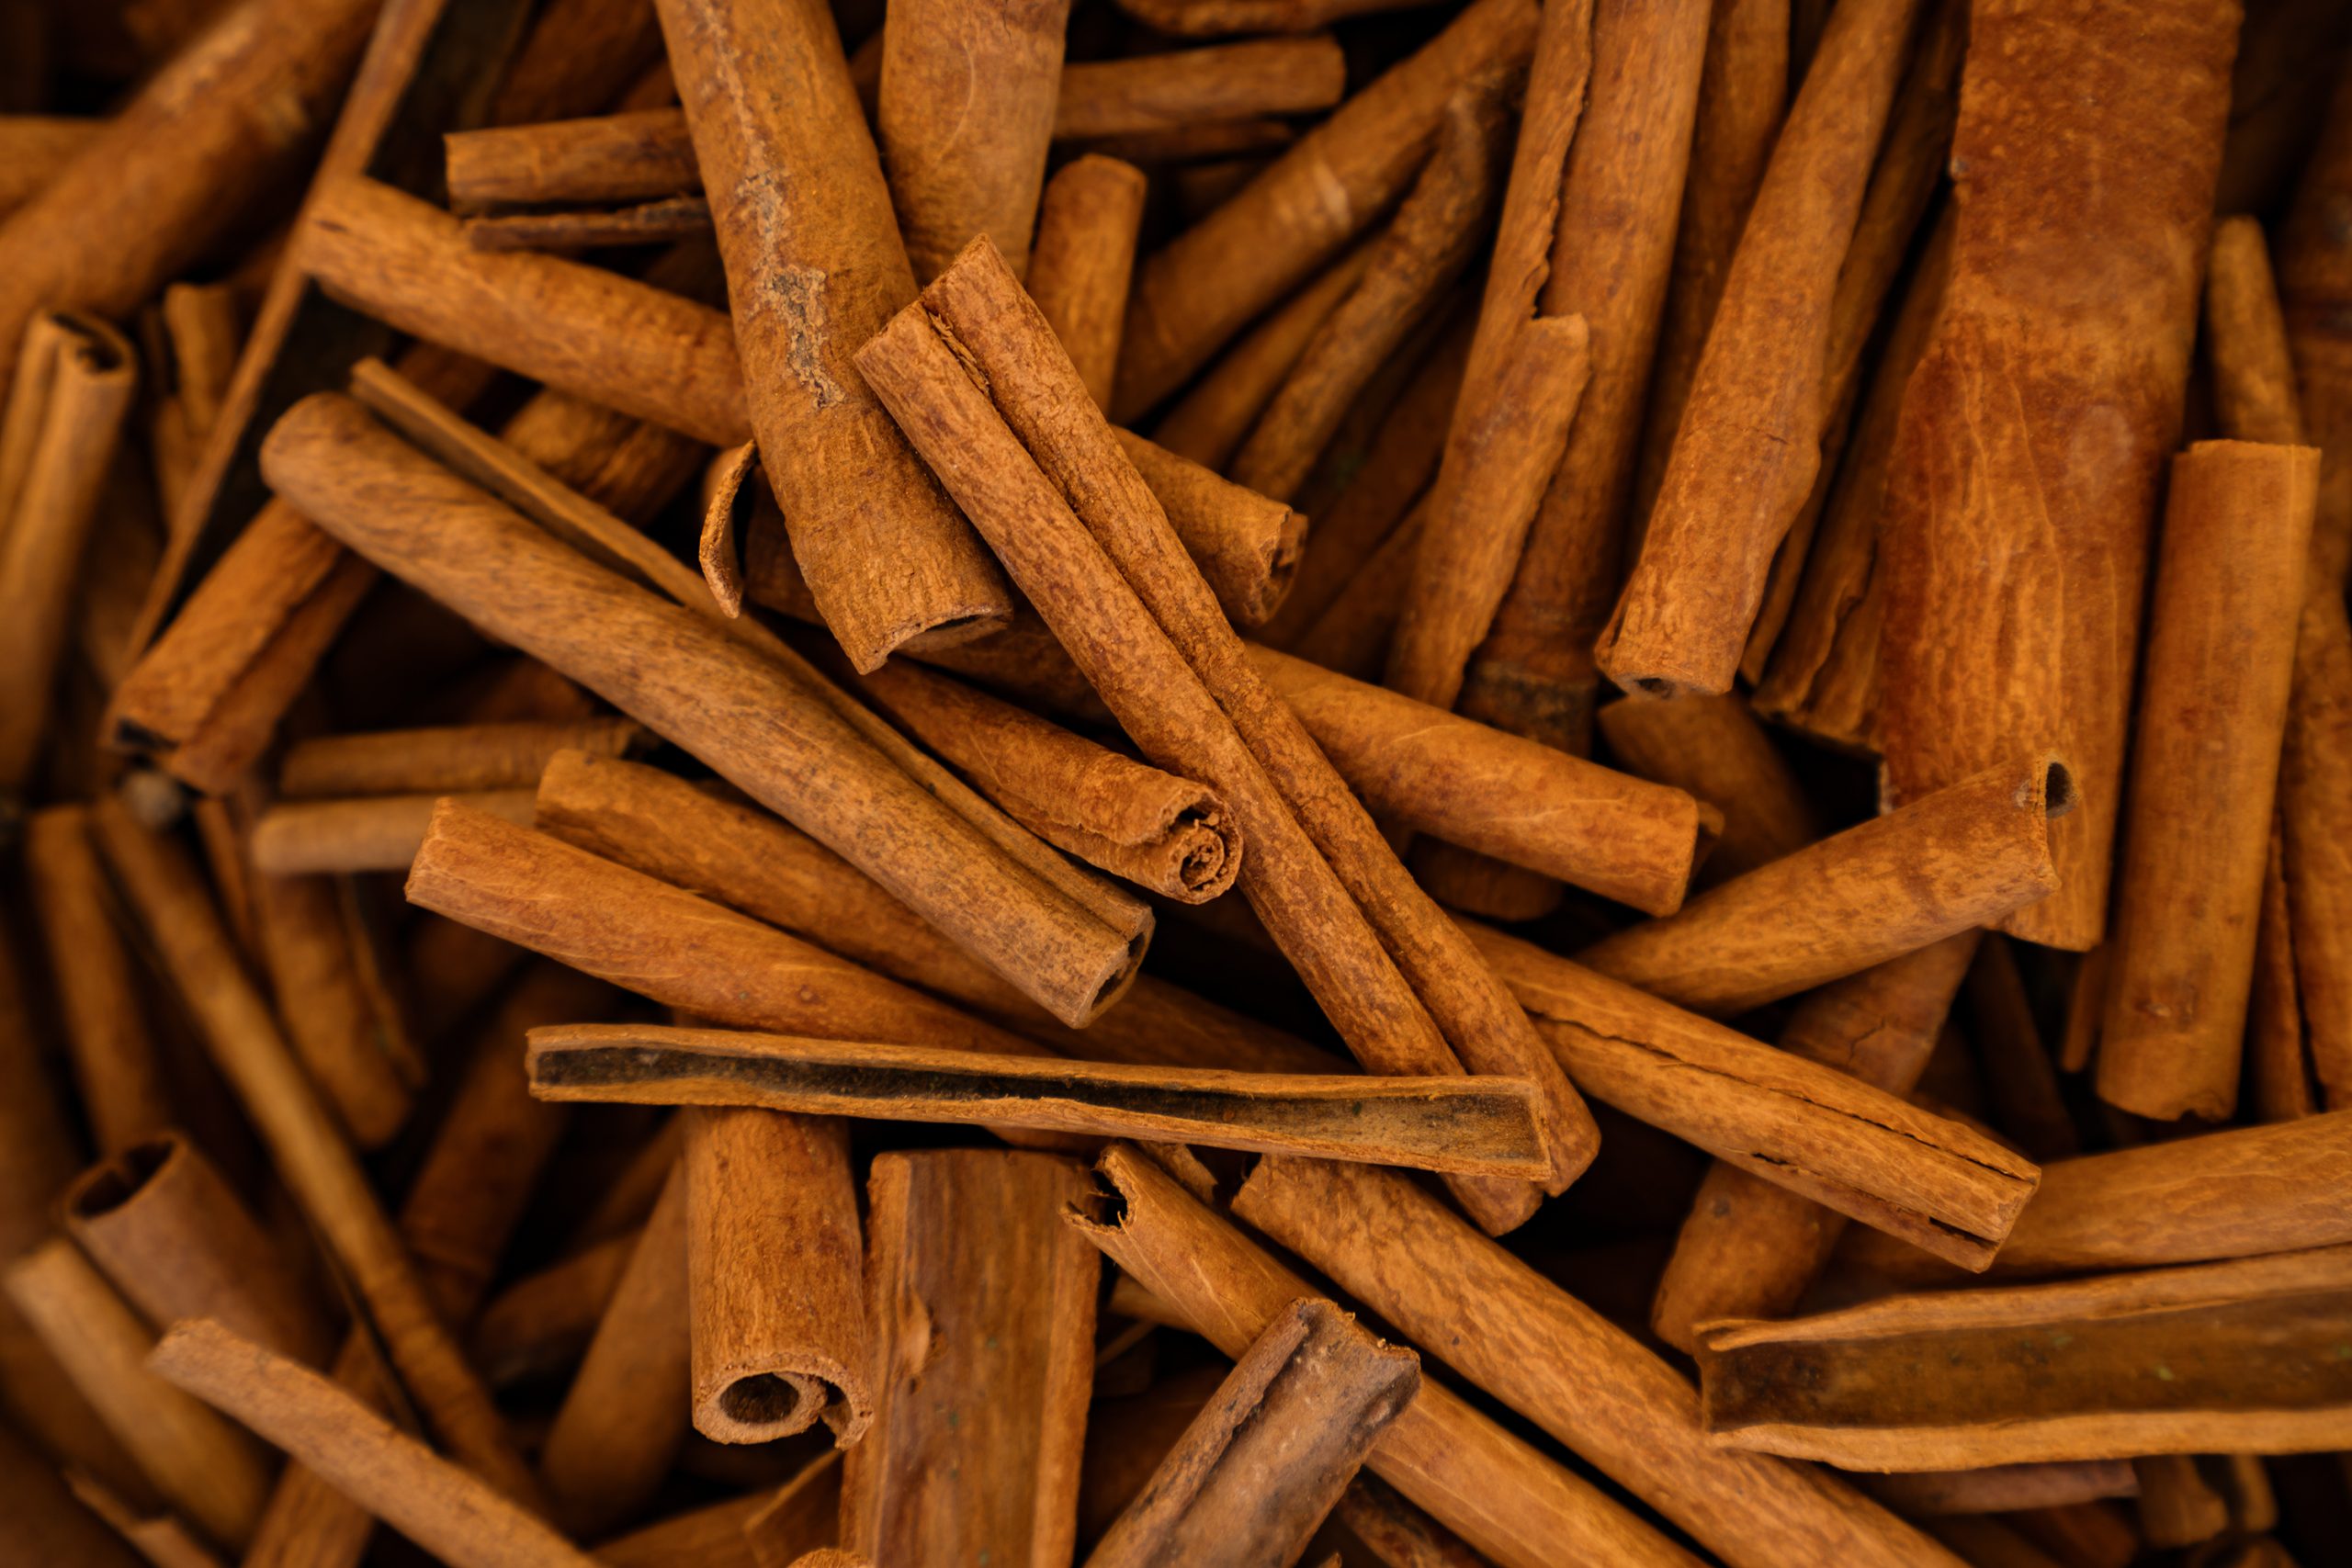 Guide to Proper Storage and Long-Term Use of Organic Cinnamon